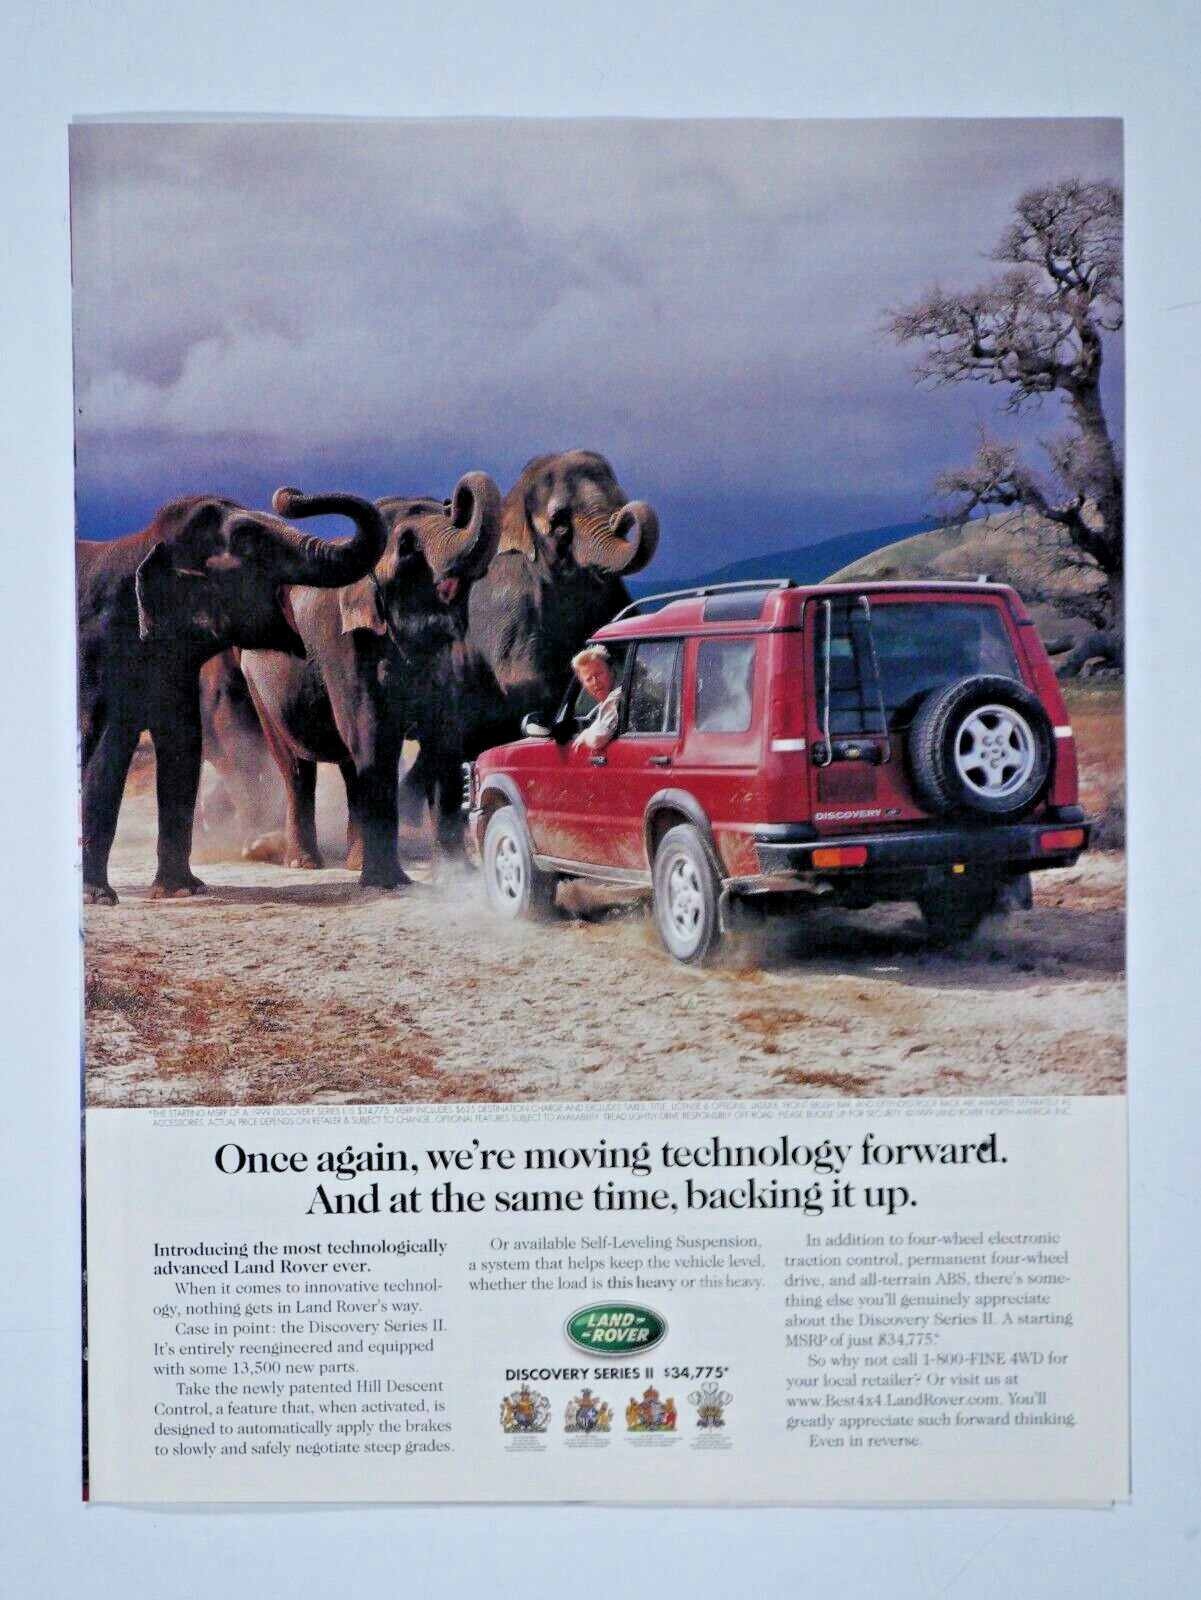 1999 Land Rover Discovery Series II Red Vintage Elephants Original Print Ad